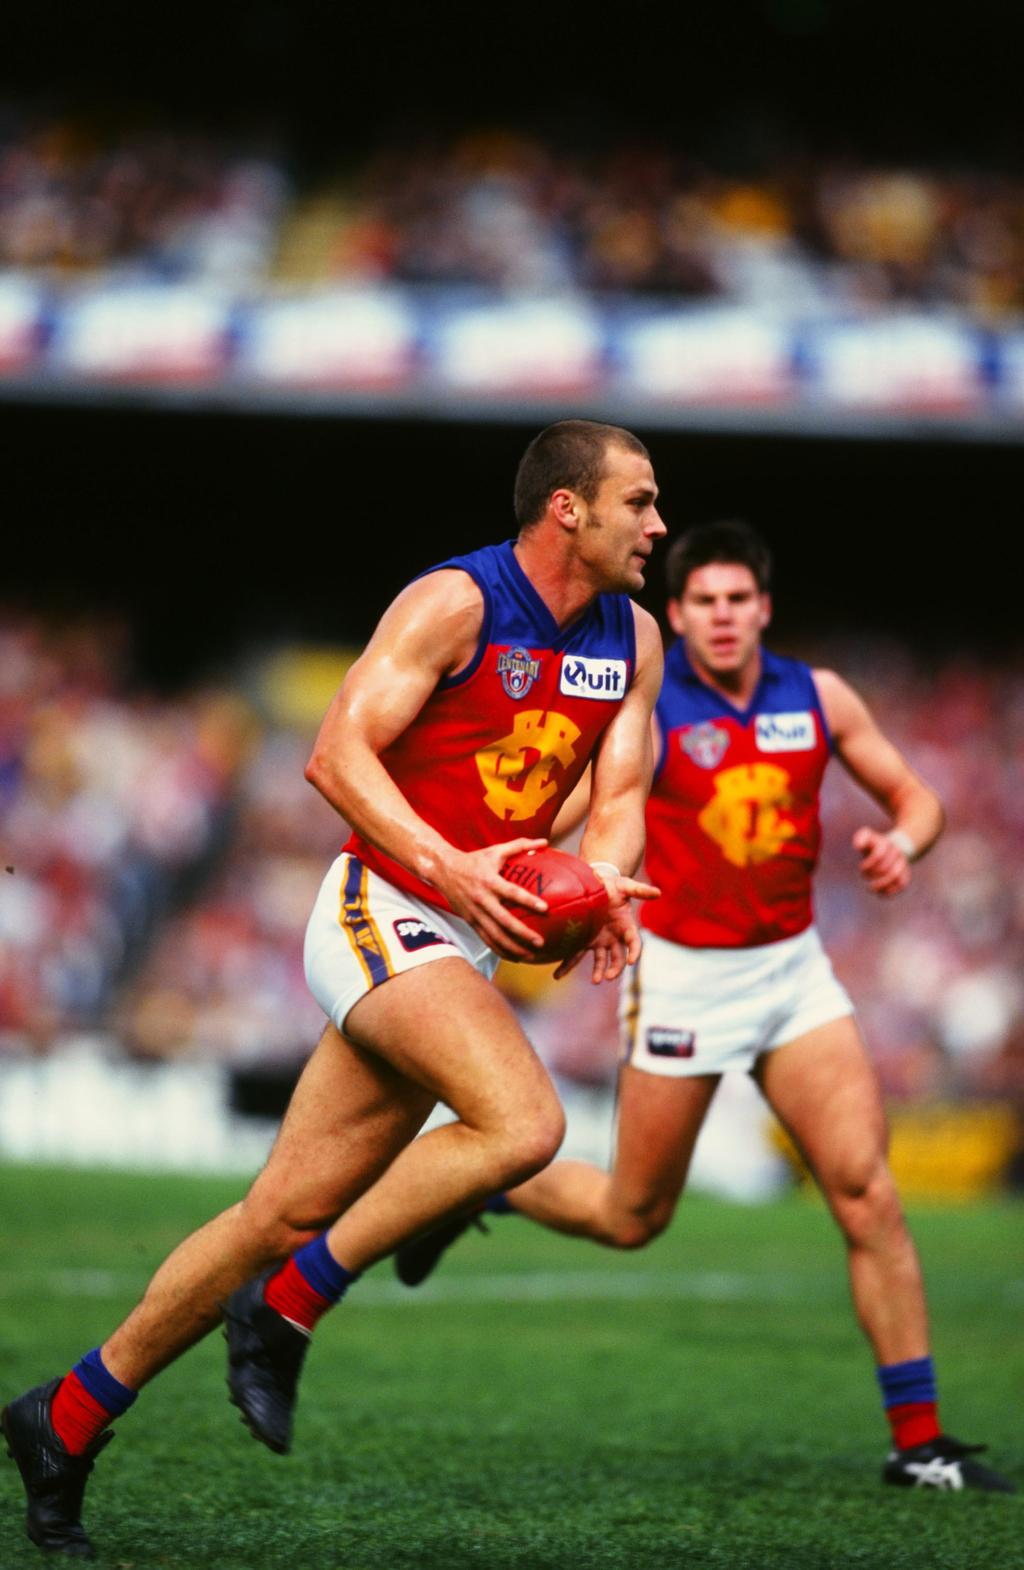 TEAM LISTS RED 1 RED 2 MARTIN PIKE (Fitzroy/Brisbane Lions) GAMES: 142 GOALS: 82 YEARS: 1995-96, 2001-05 3 Akshay Naidoo 4 Steven Loney 5 Peter Bailey 6 Jeremy Guard 7